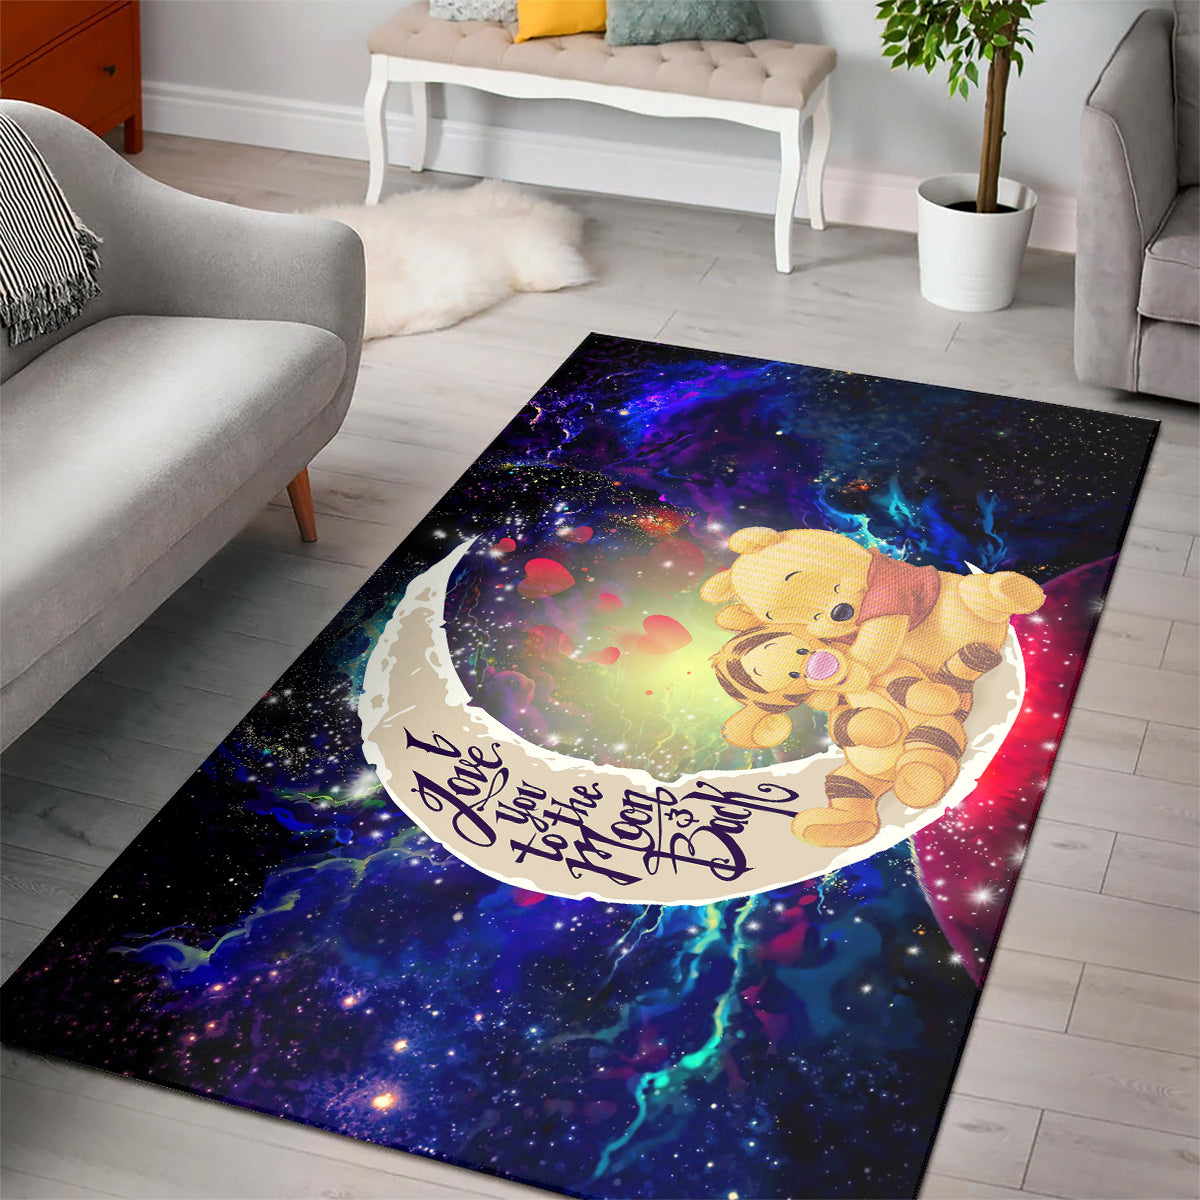 Winnie The Pooh Love You To The Moon Galaxy Carpet Rug Home Room Decor